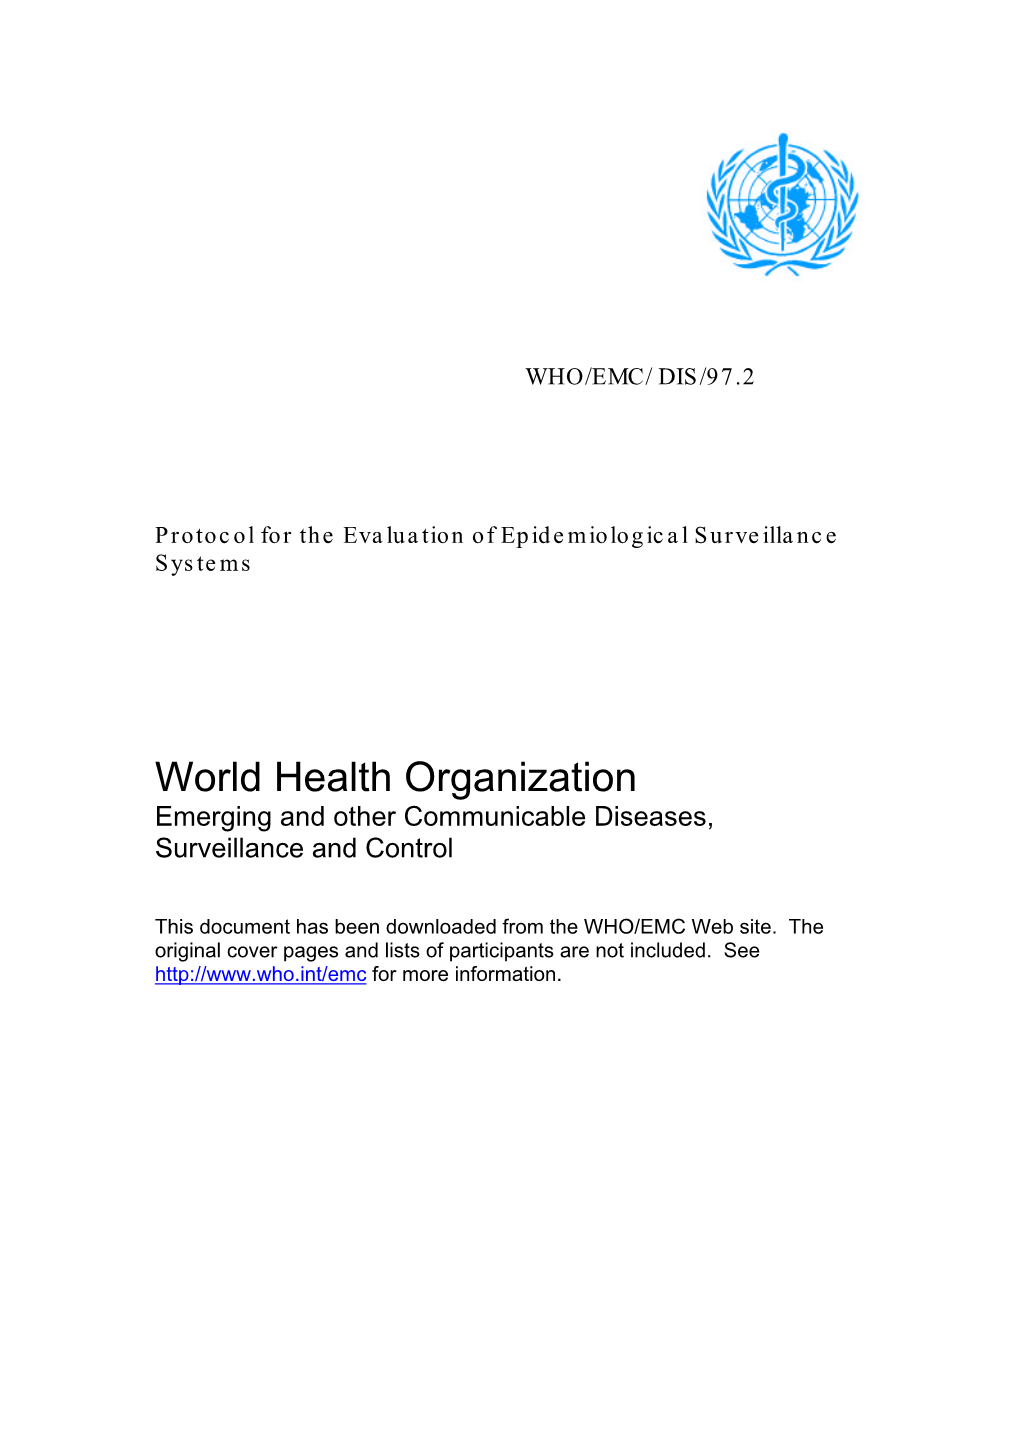 Protocol for the Evaluation of Epidemiological Surveillance Systems